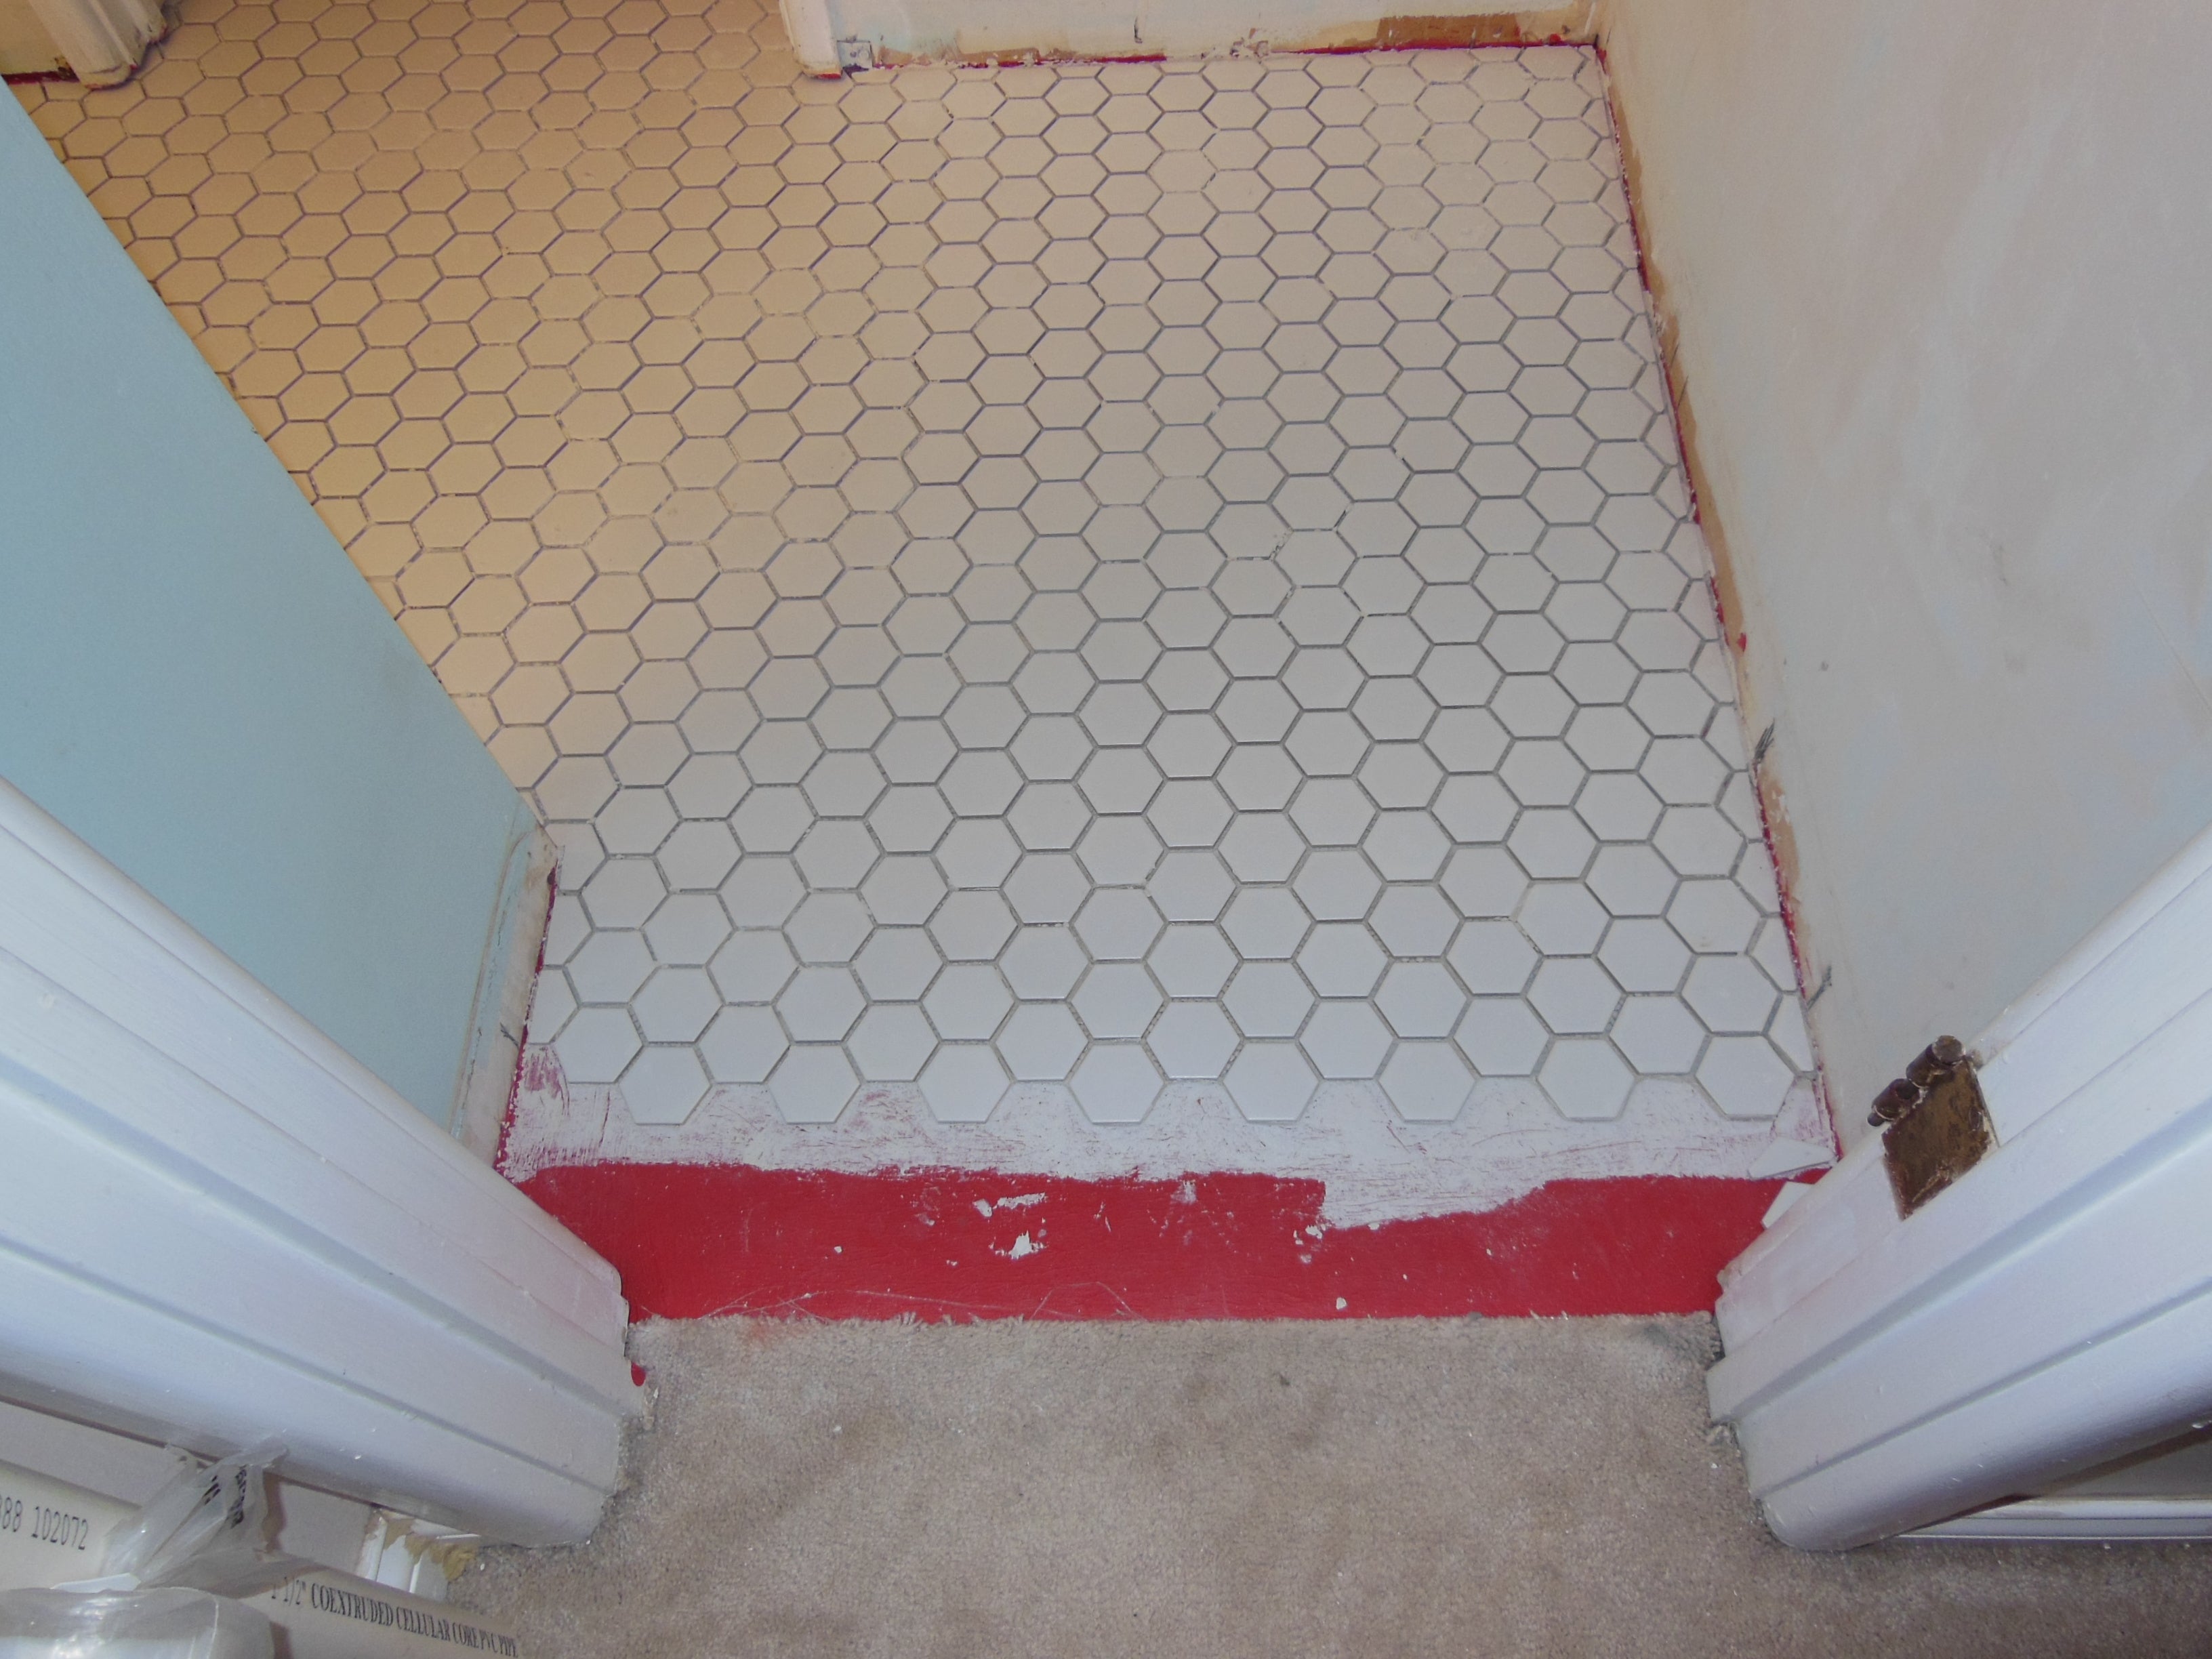 Transition Tile To Carpet Contractor